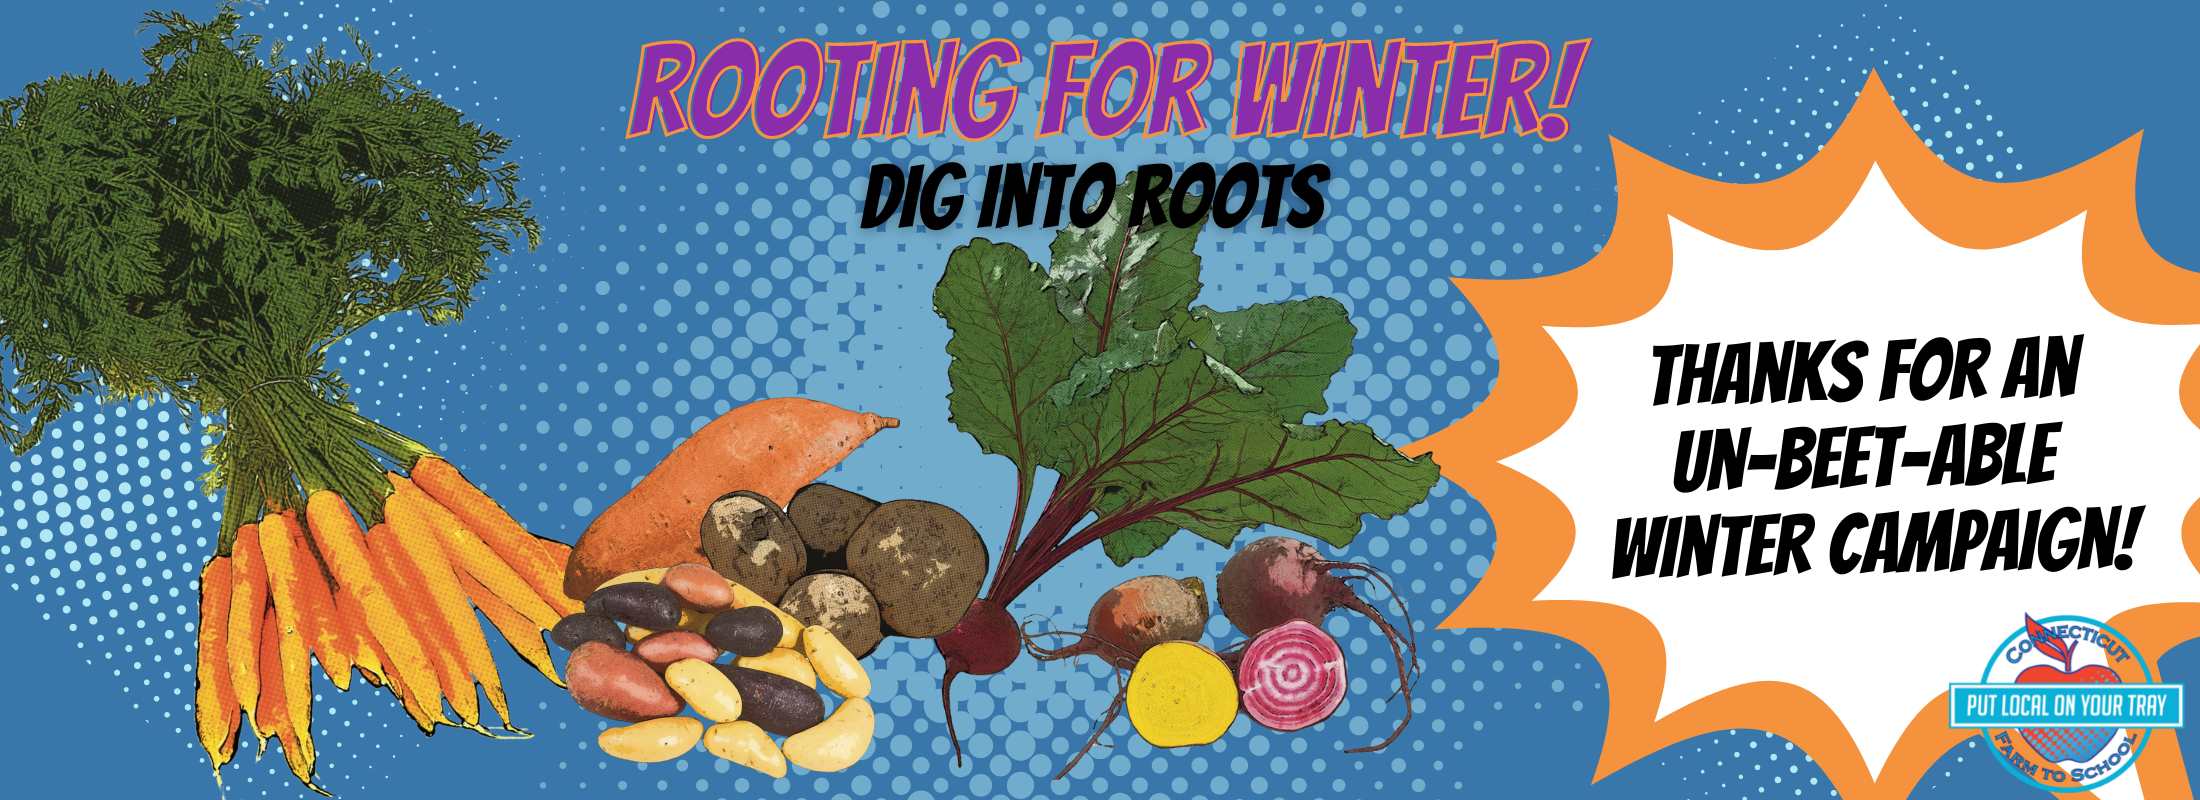 Rooting for winter campaign with pictures of carrot, beets, and potatoes